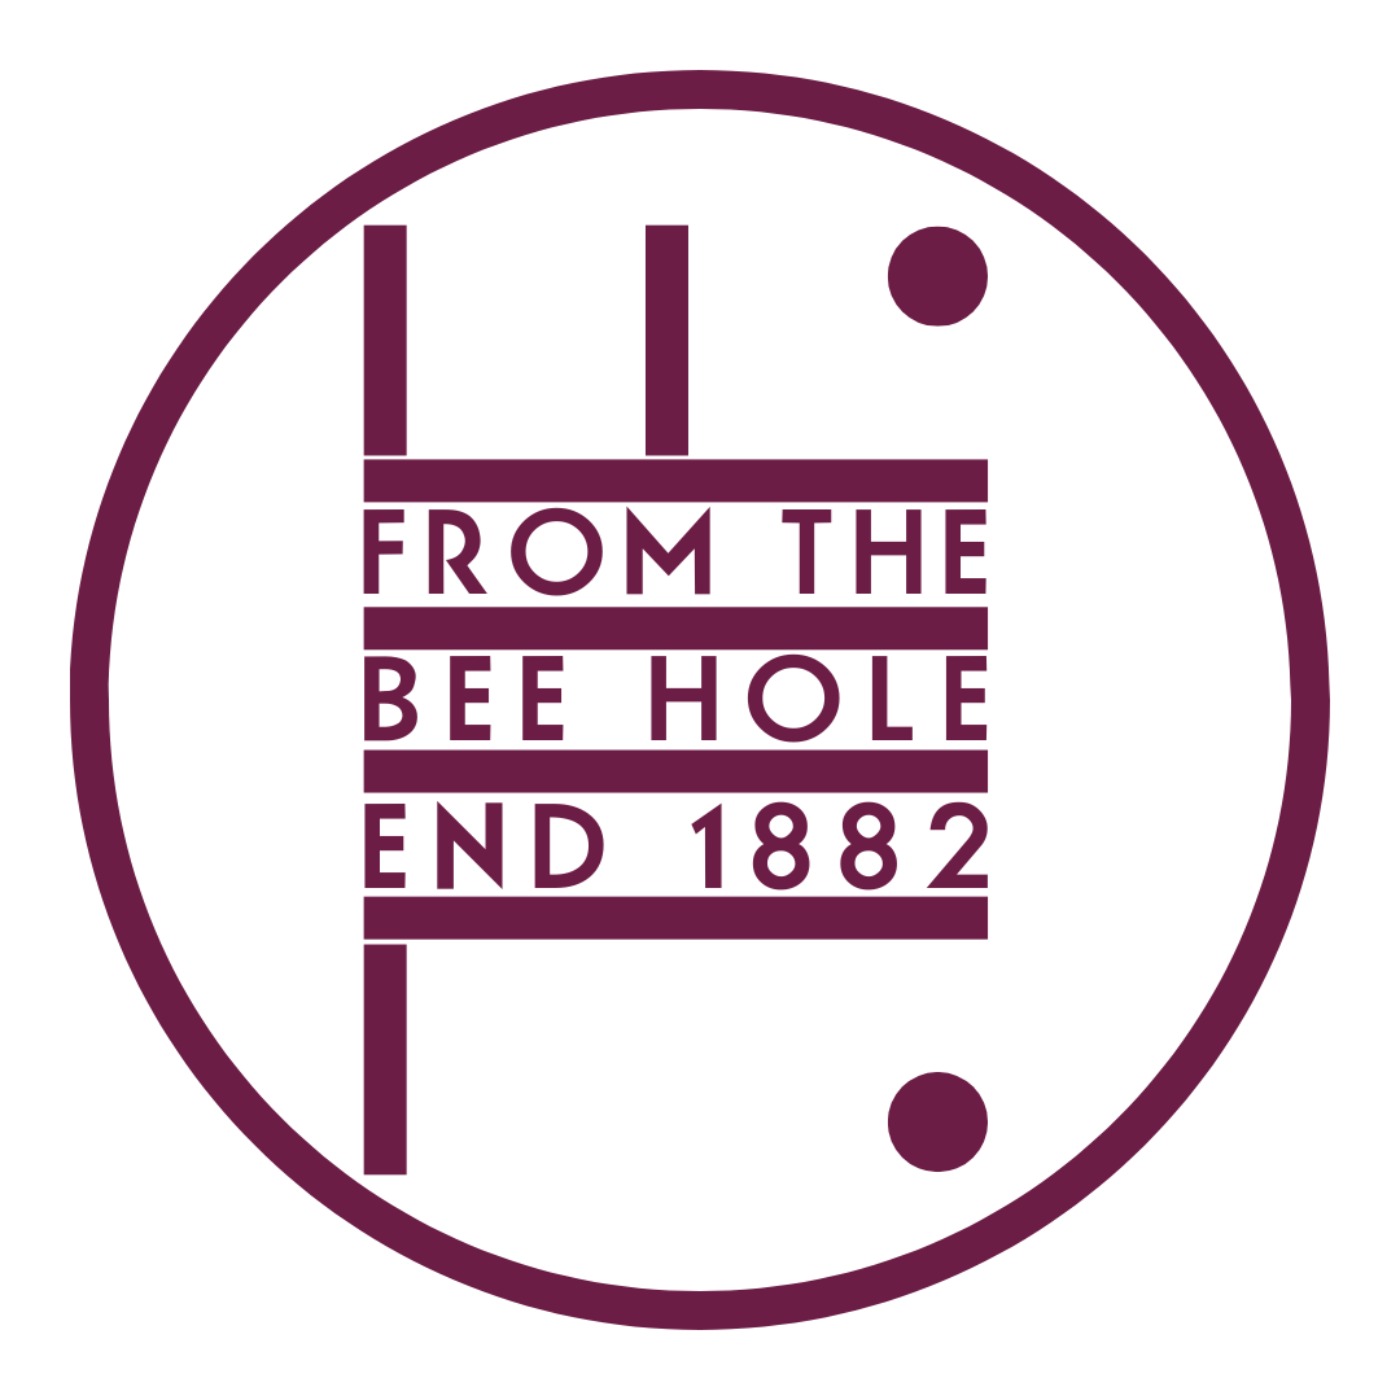 From the Bee Hole End - The Debrief - Fulham